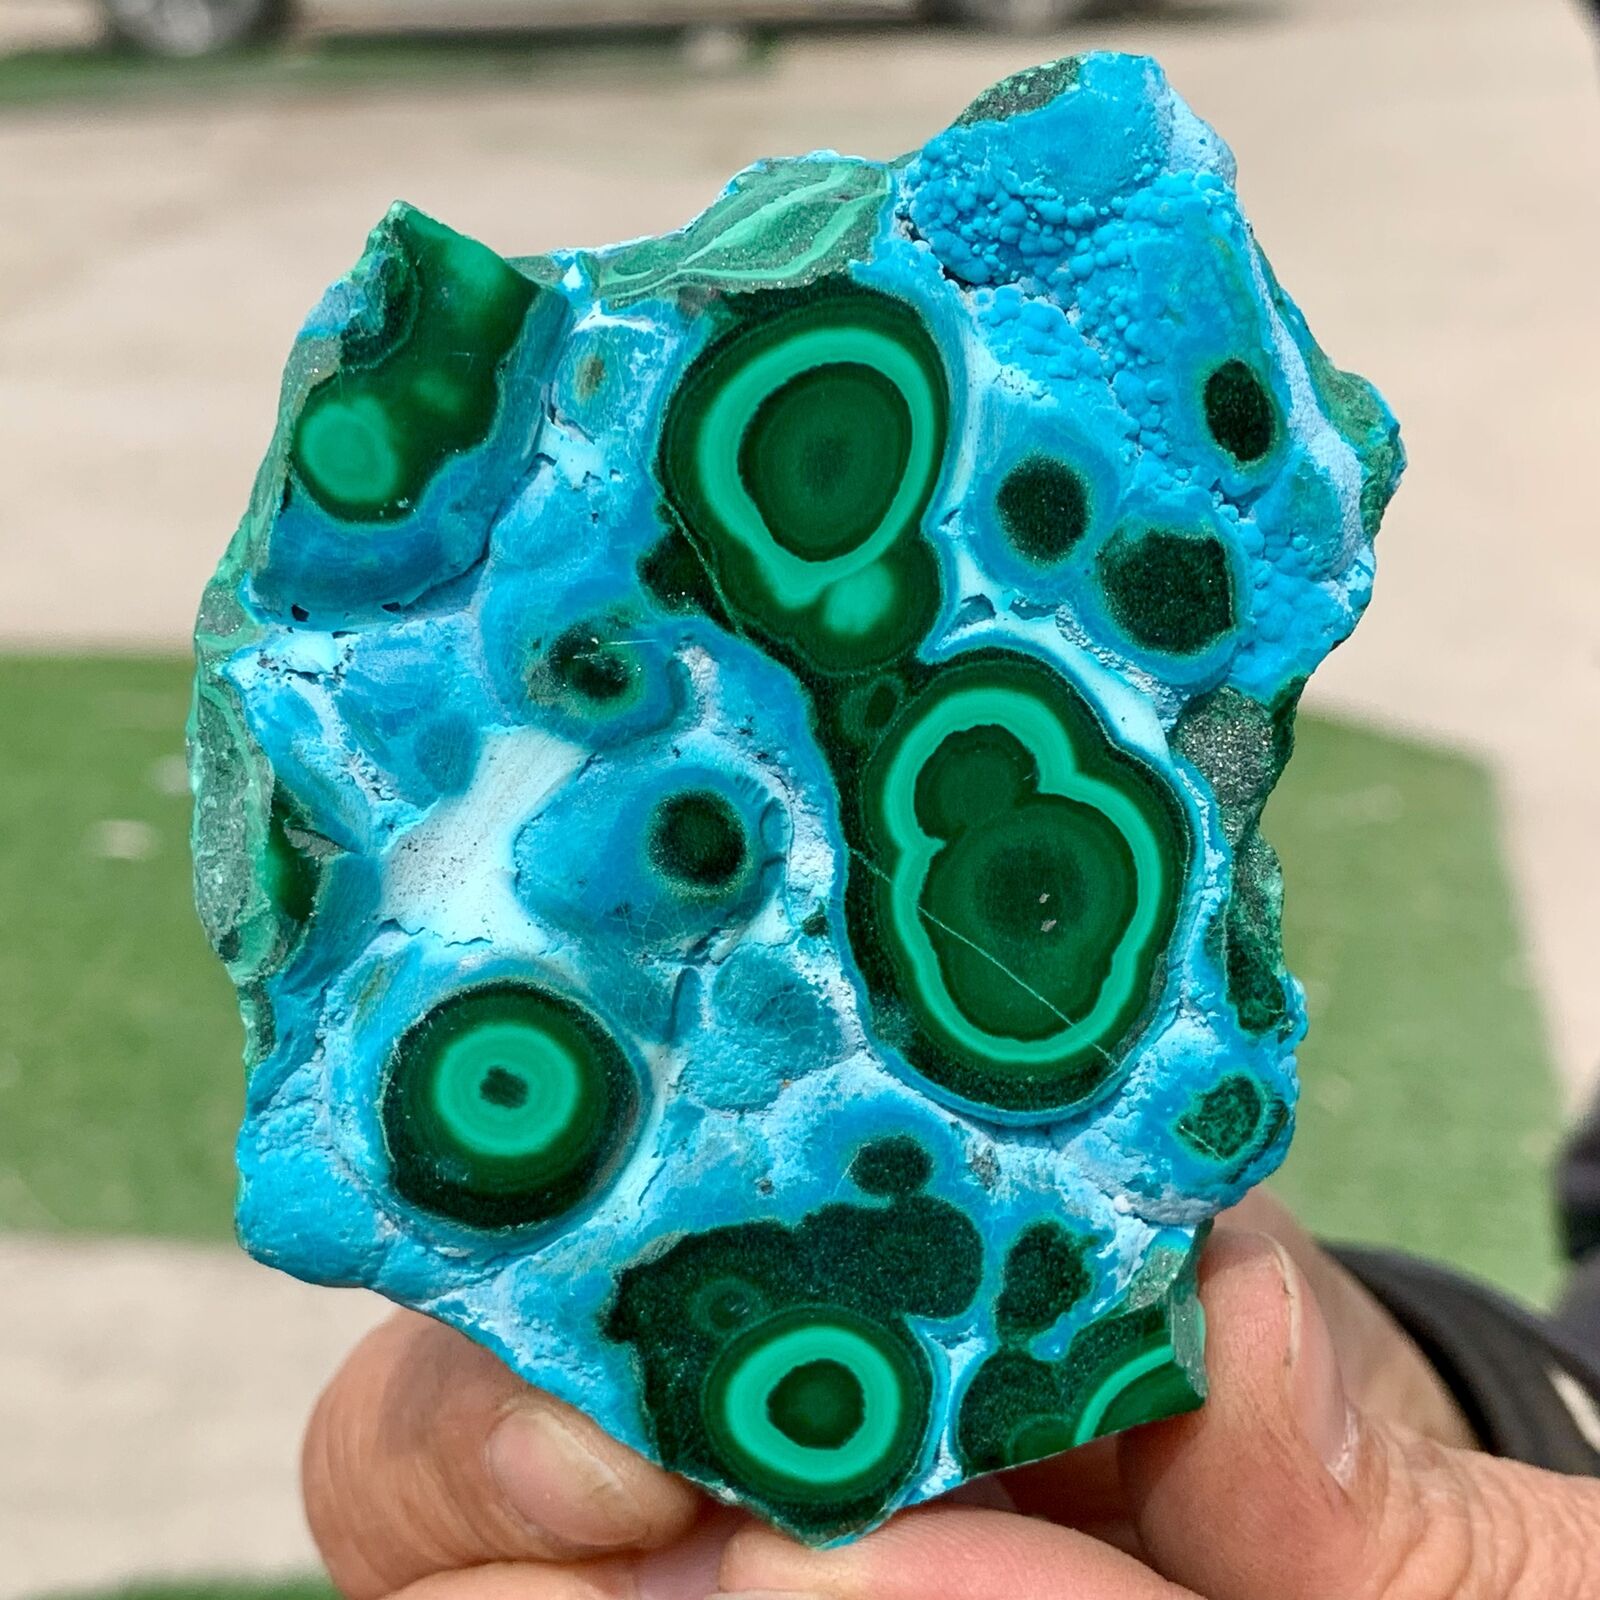 204G Natural Chrysocolla/Malachite transparent cluster rough mineral sample